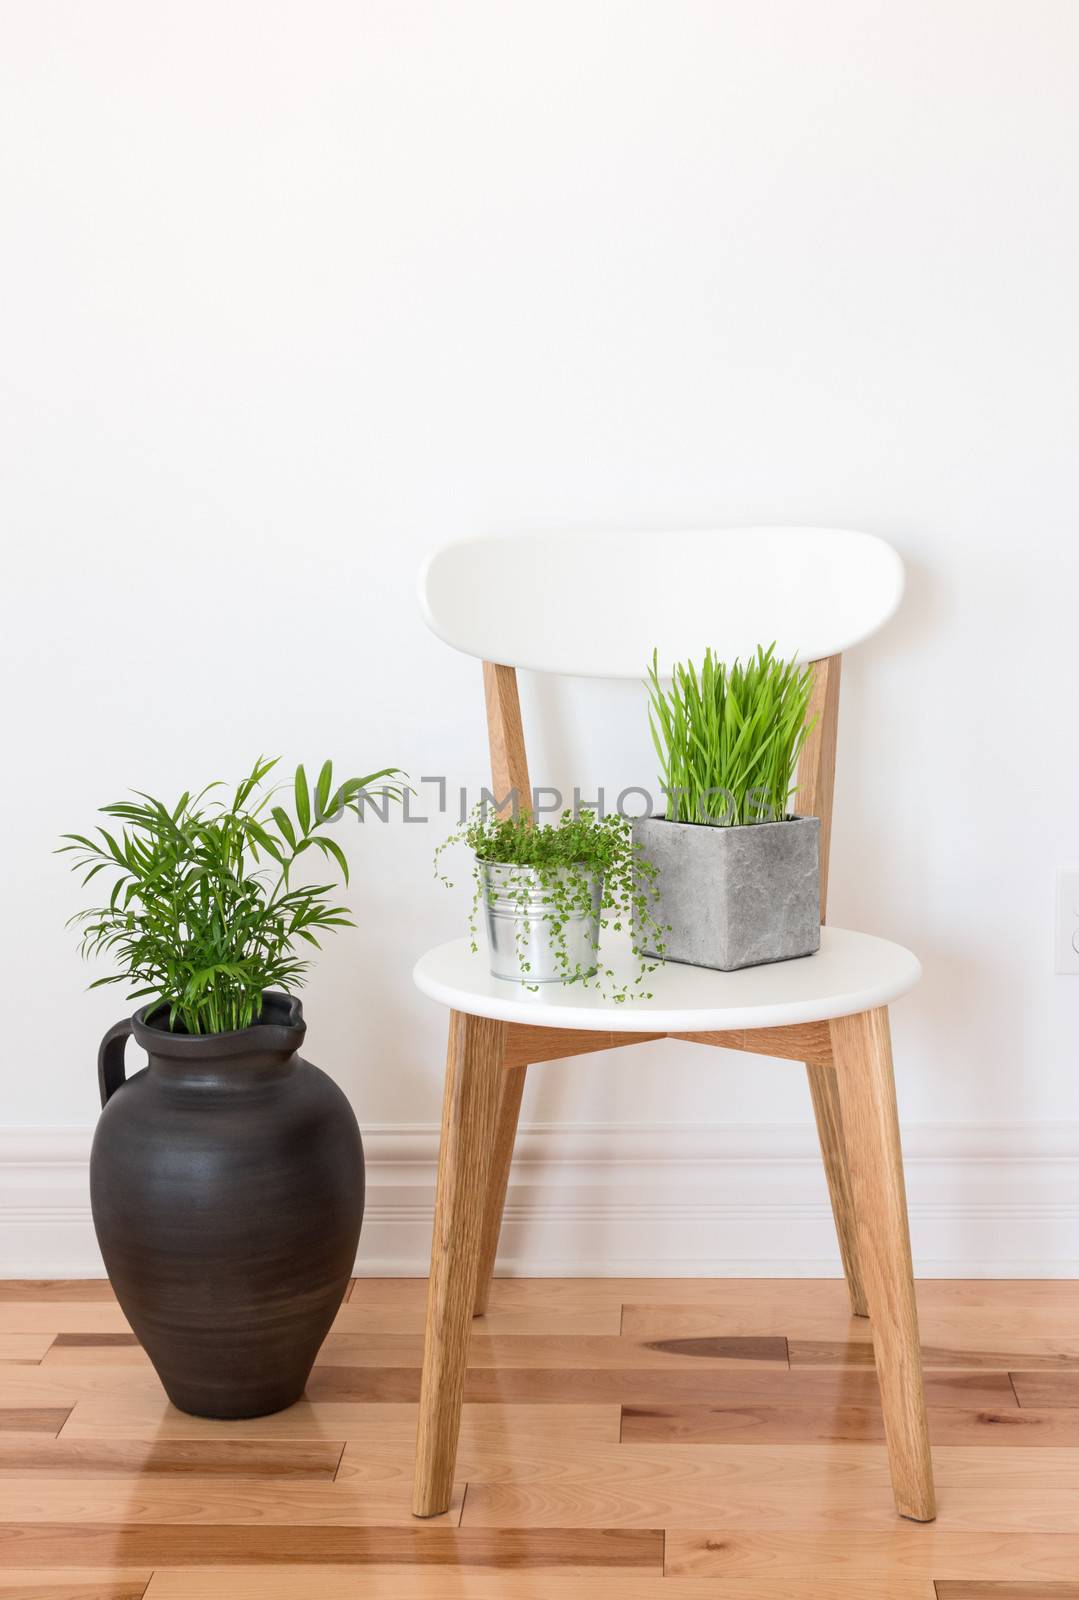 White wooden chair with green plants by anikasalsera